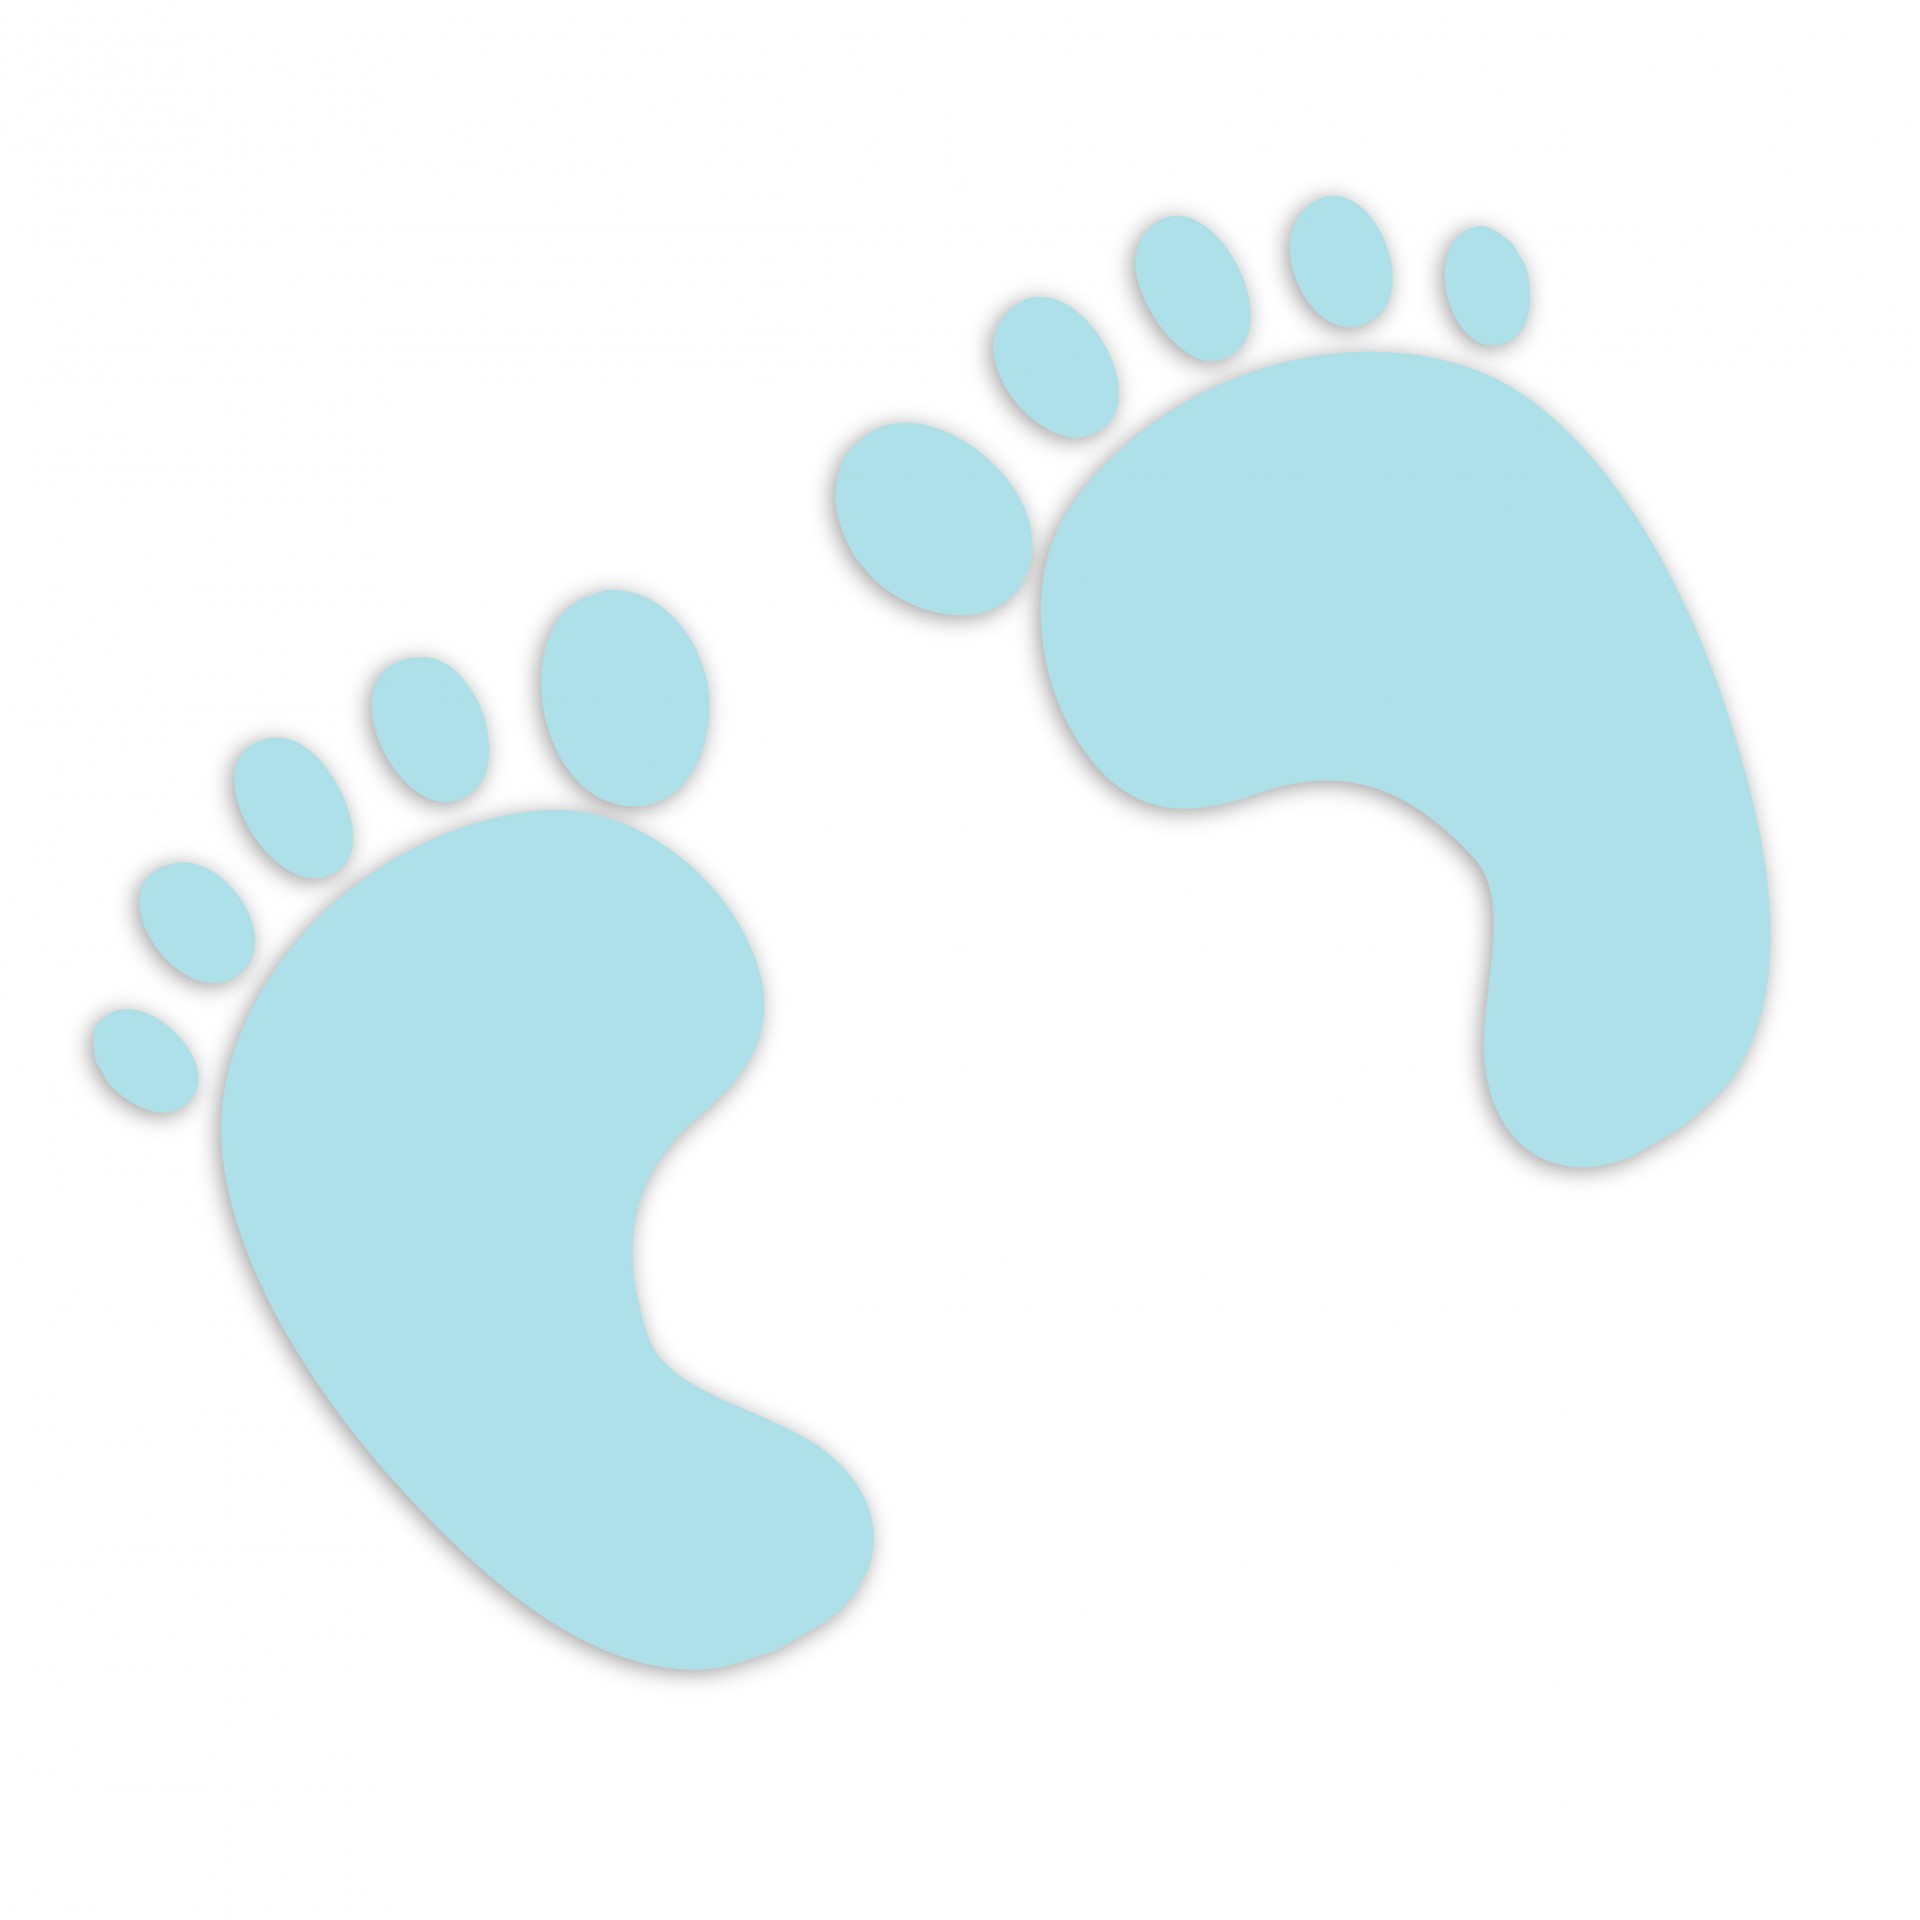 Baby Footprints Blue Clipart Free Stock Photo.